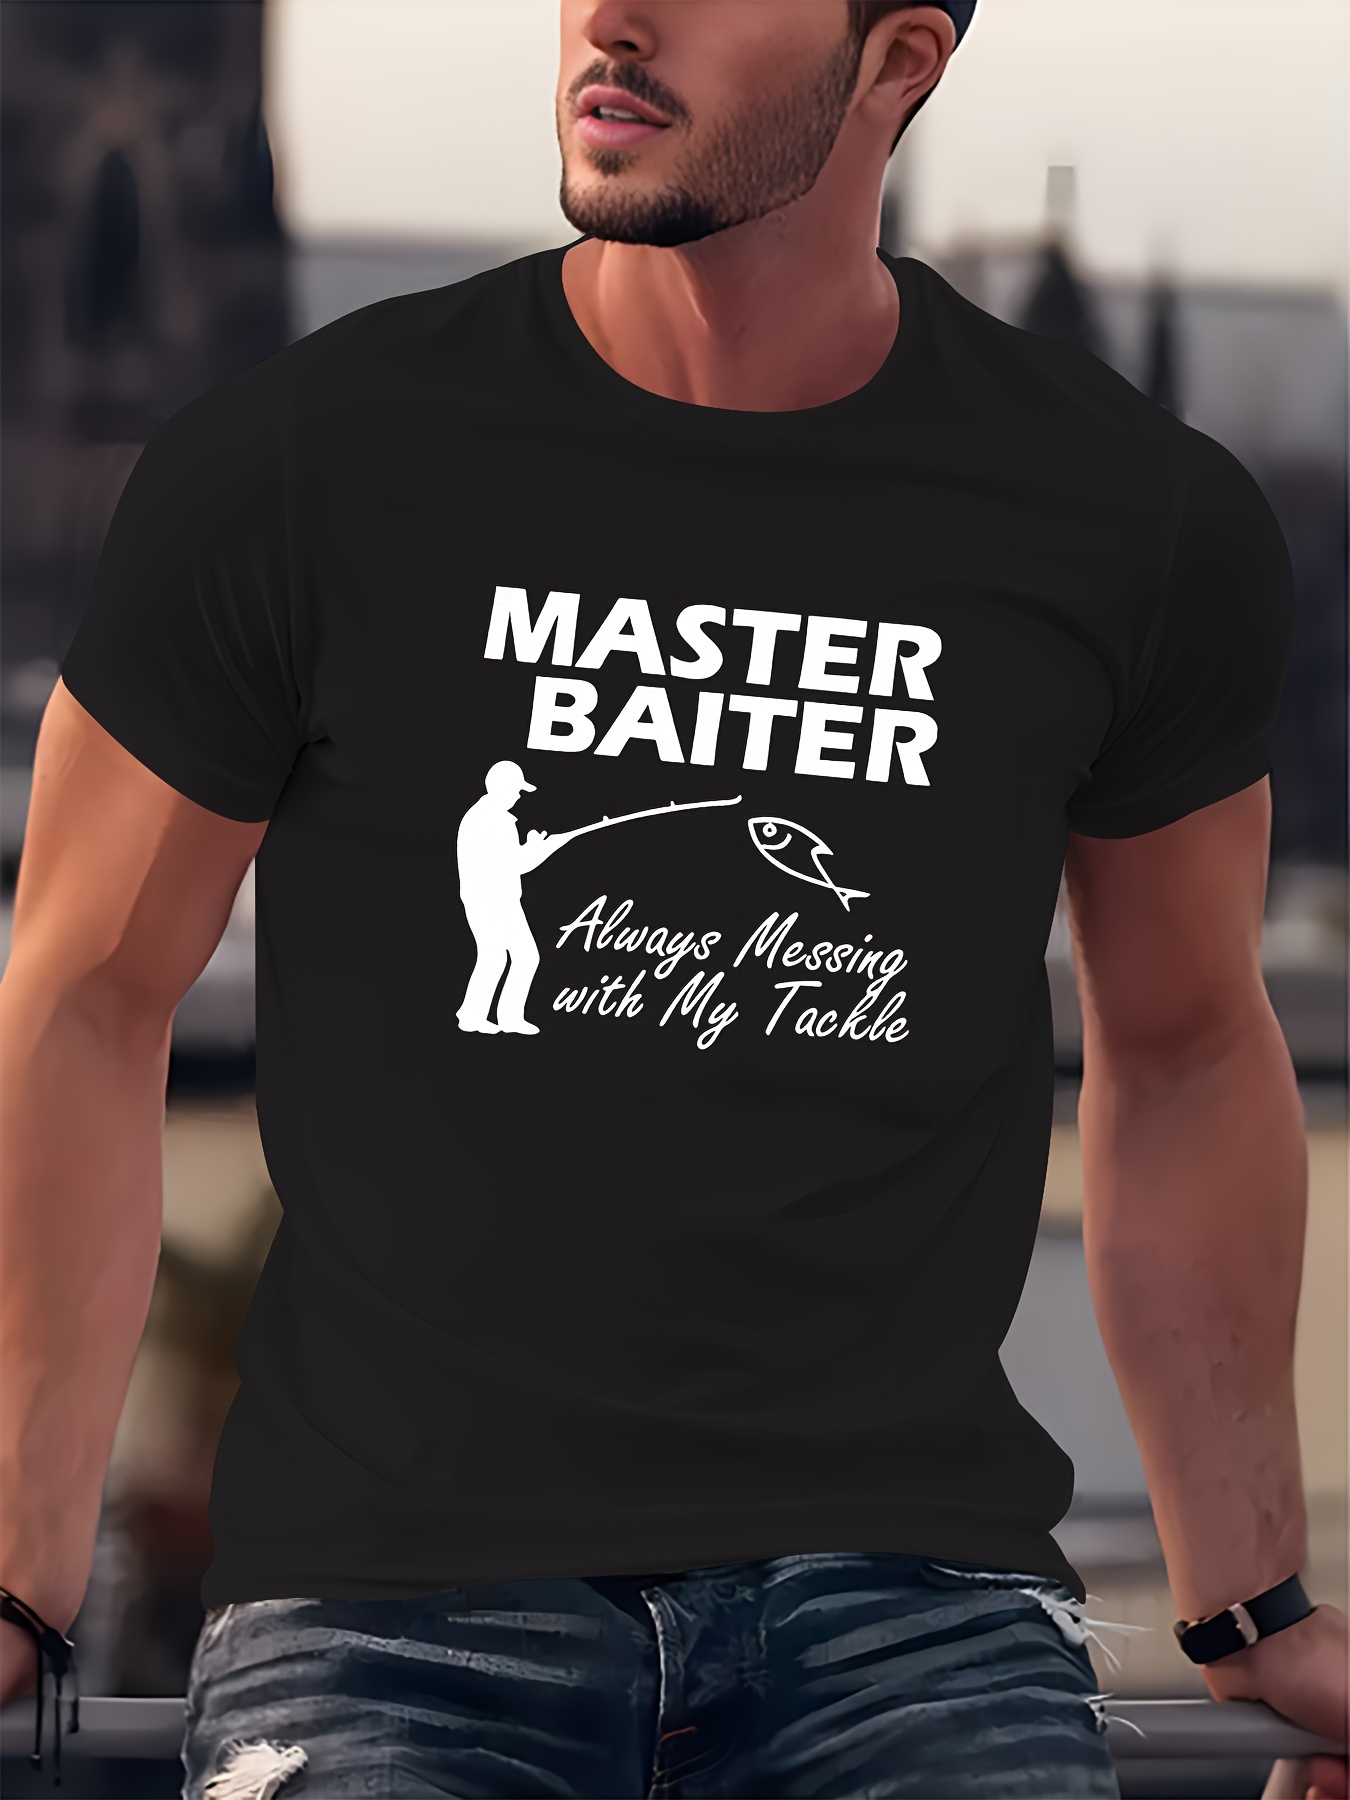 Master Baiter Shirt Funny Offensive Shirts for Men Guys Funny Fishing T Shirt adult Humor Rude T-shirts Dirty Sexual Saying Graphic Tee